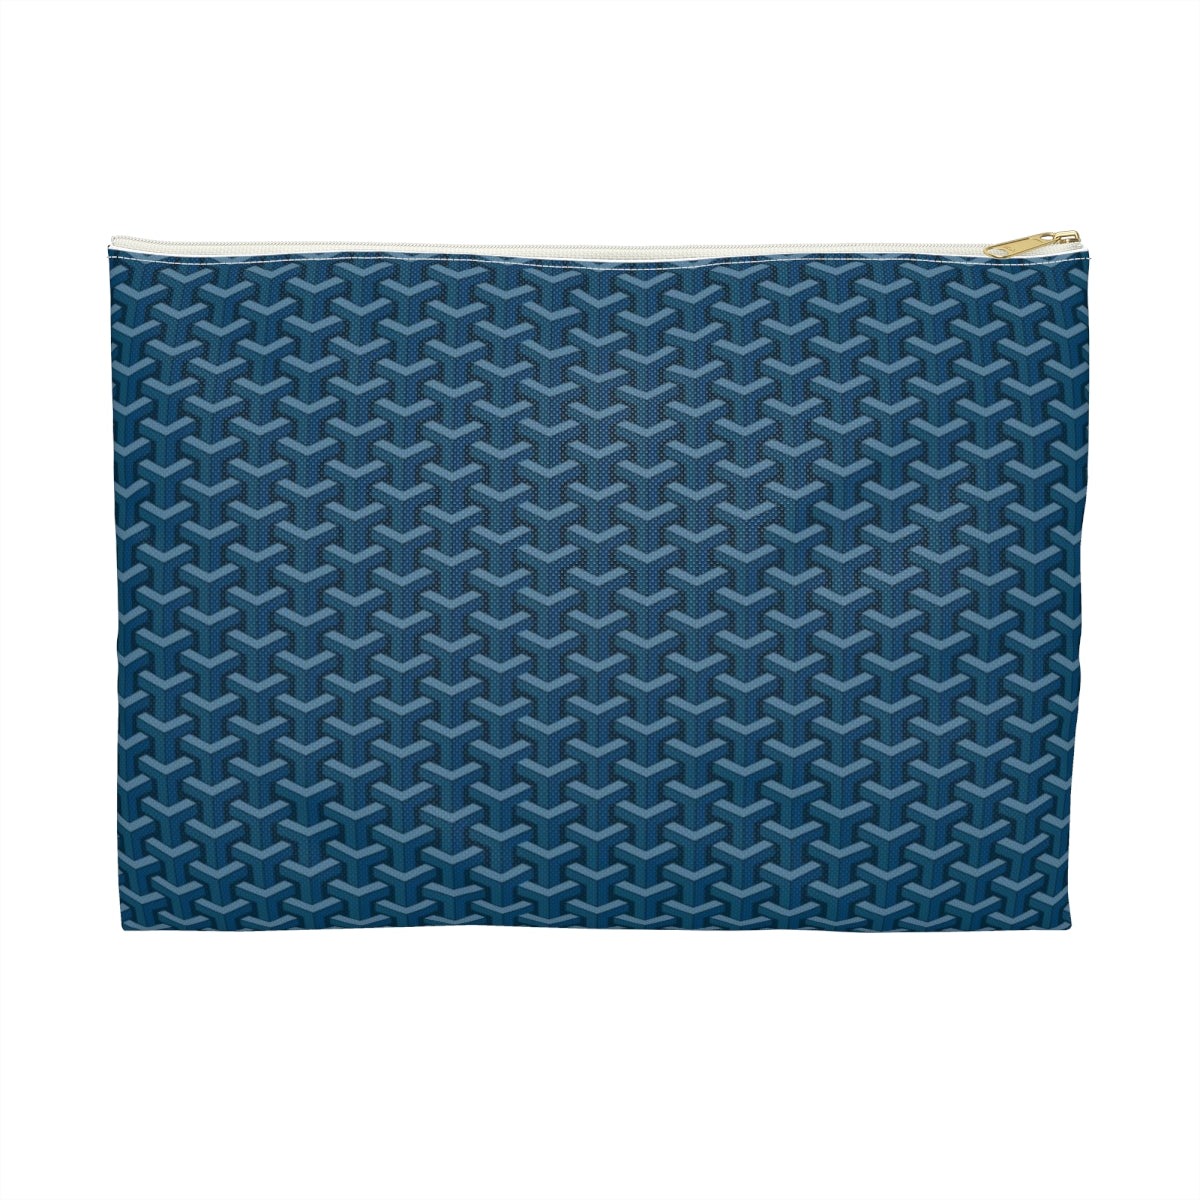 Chic Geometric Pattern in Navy and blues - Accessory Pouch Zip